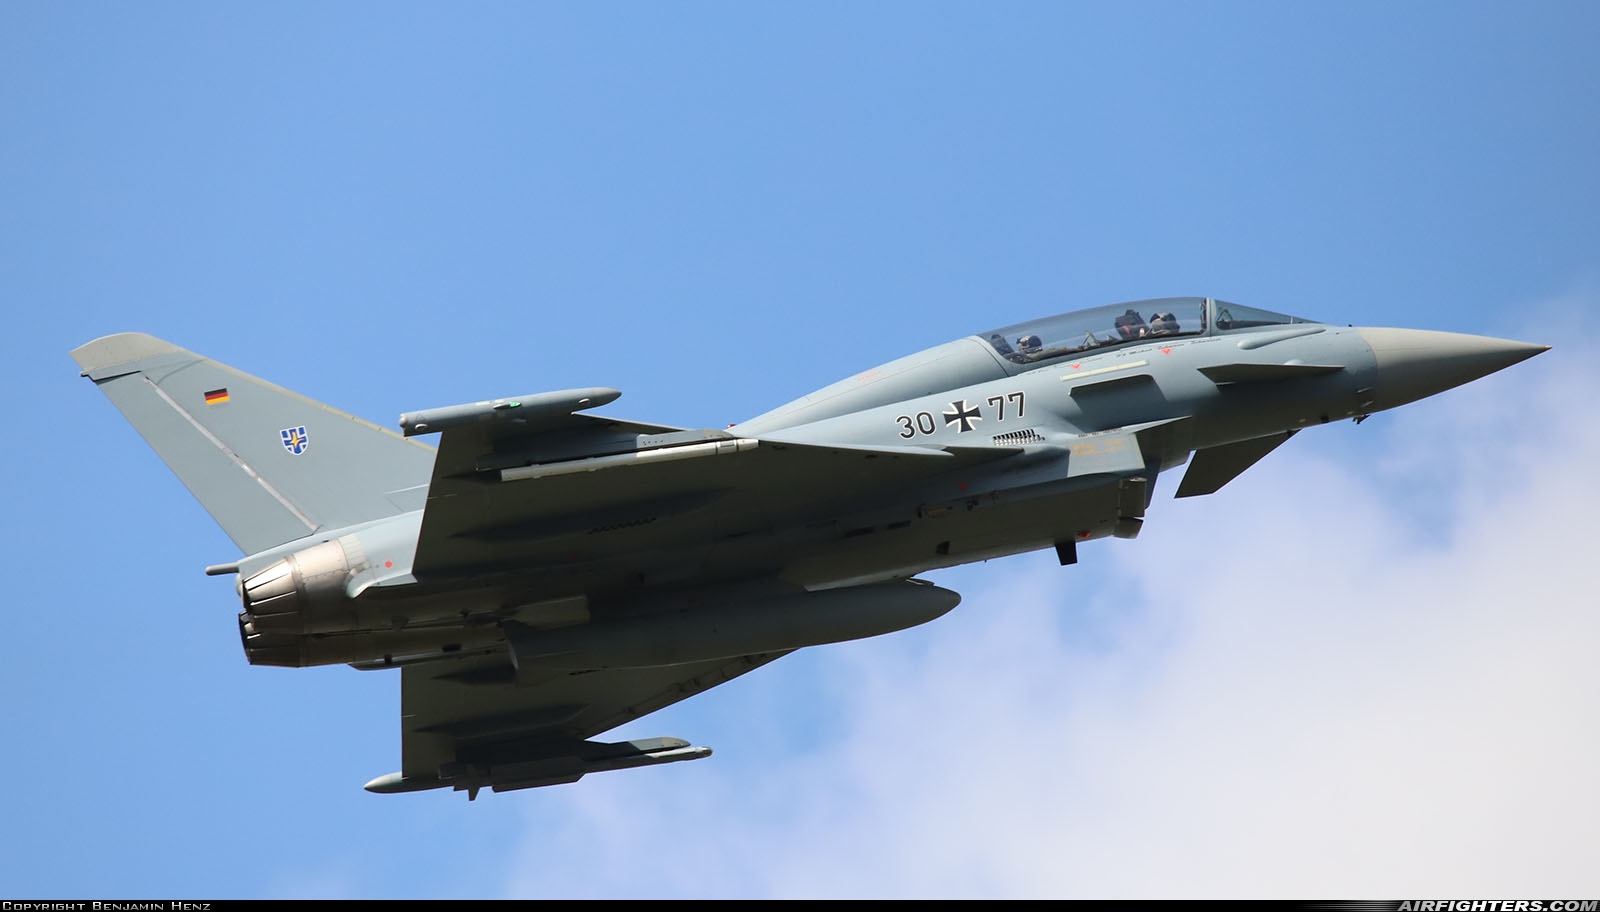 Germany - Air Force Eurofighter EF-2000 Typhoon T 30+77 at Rostock - Laage (RLG / ETNL), Germany